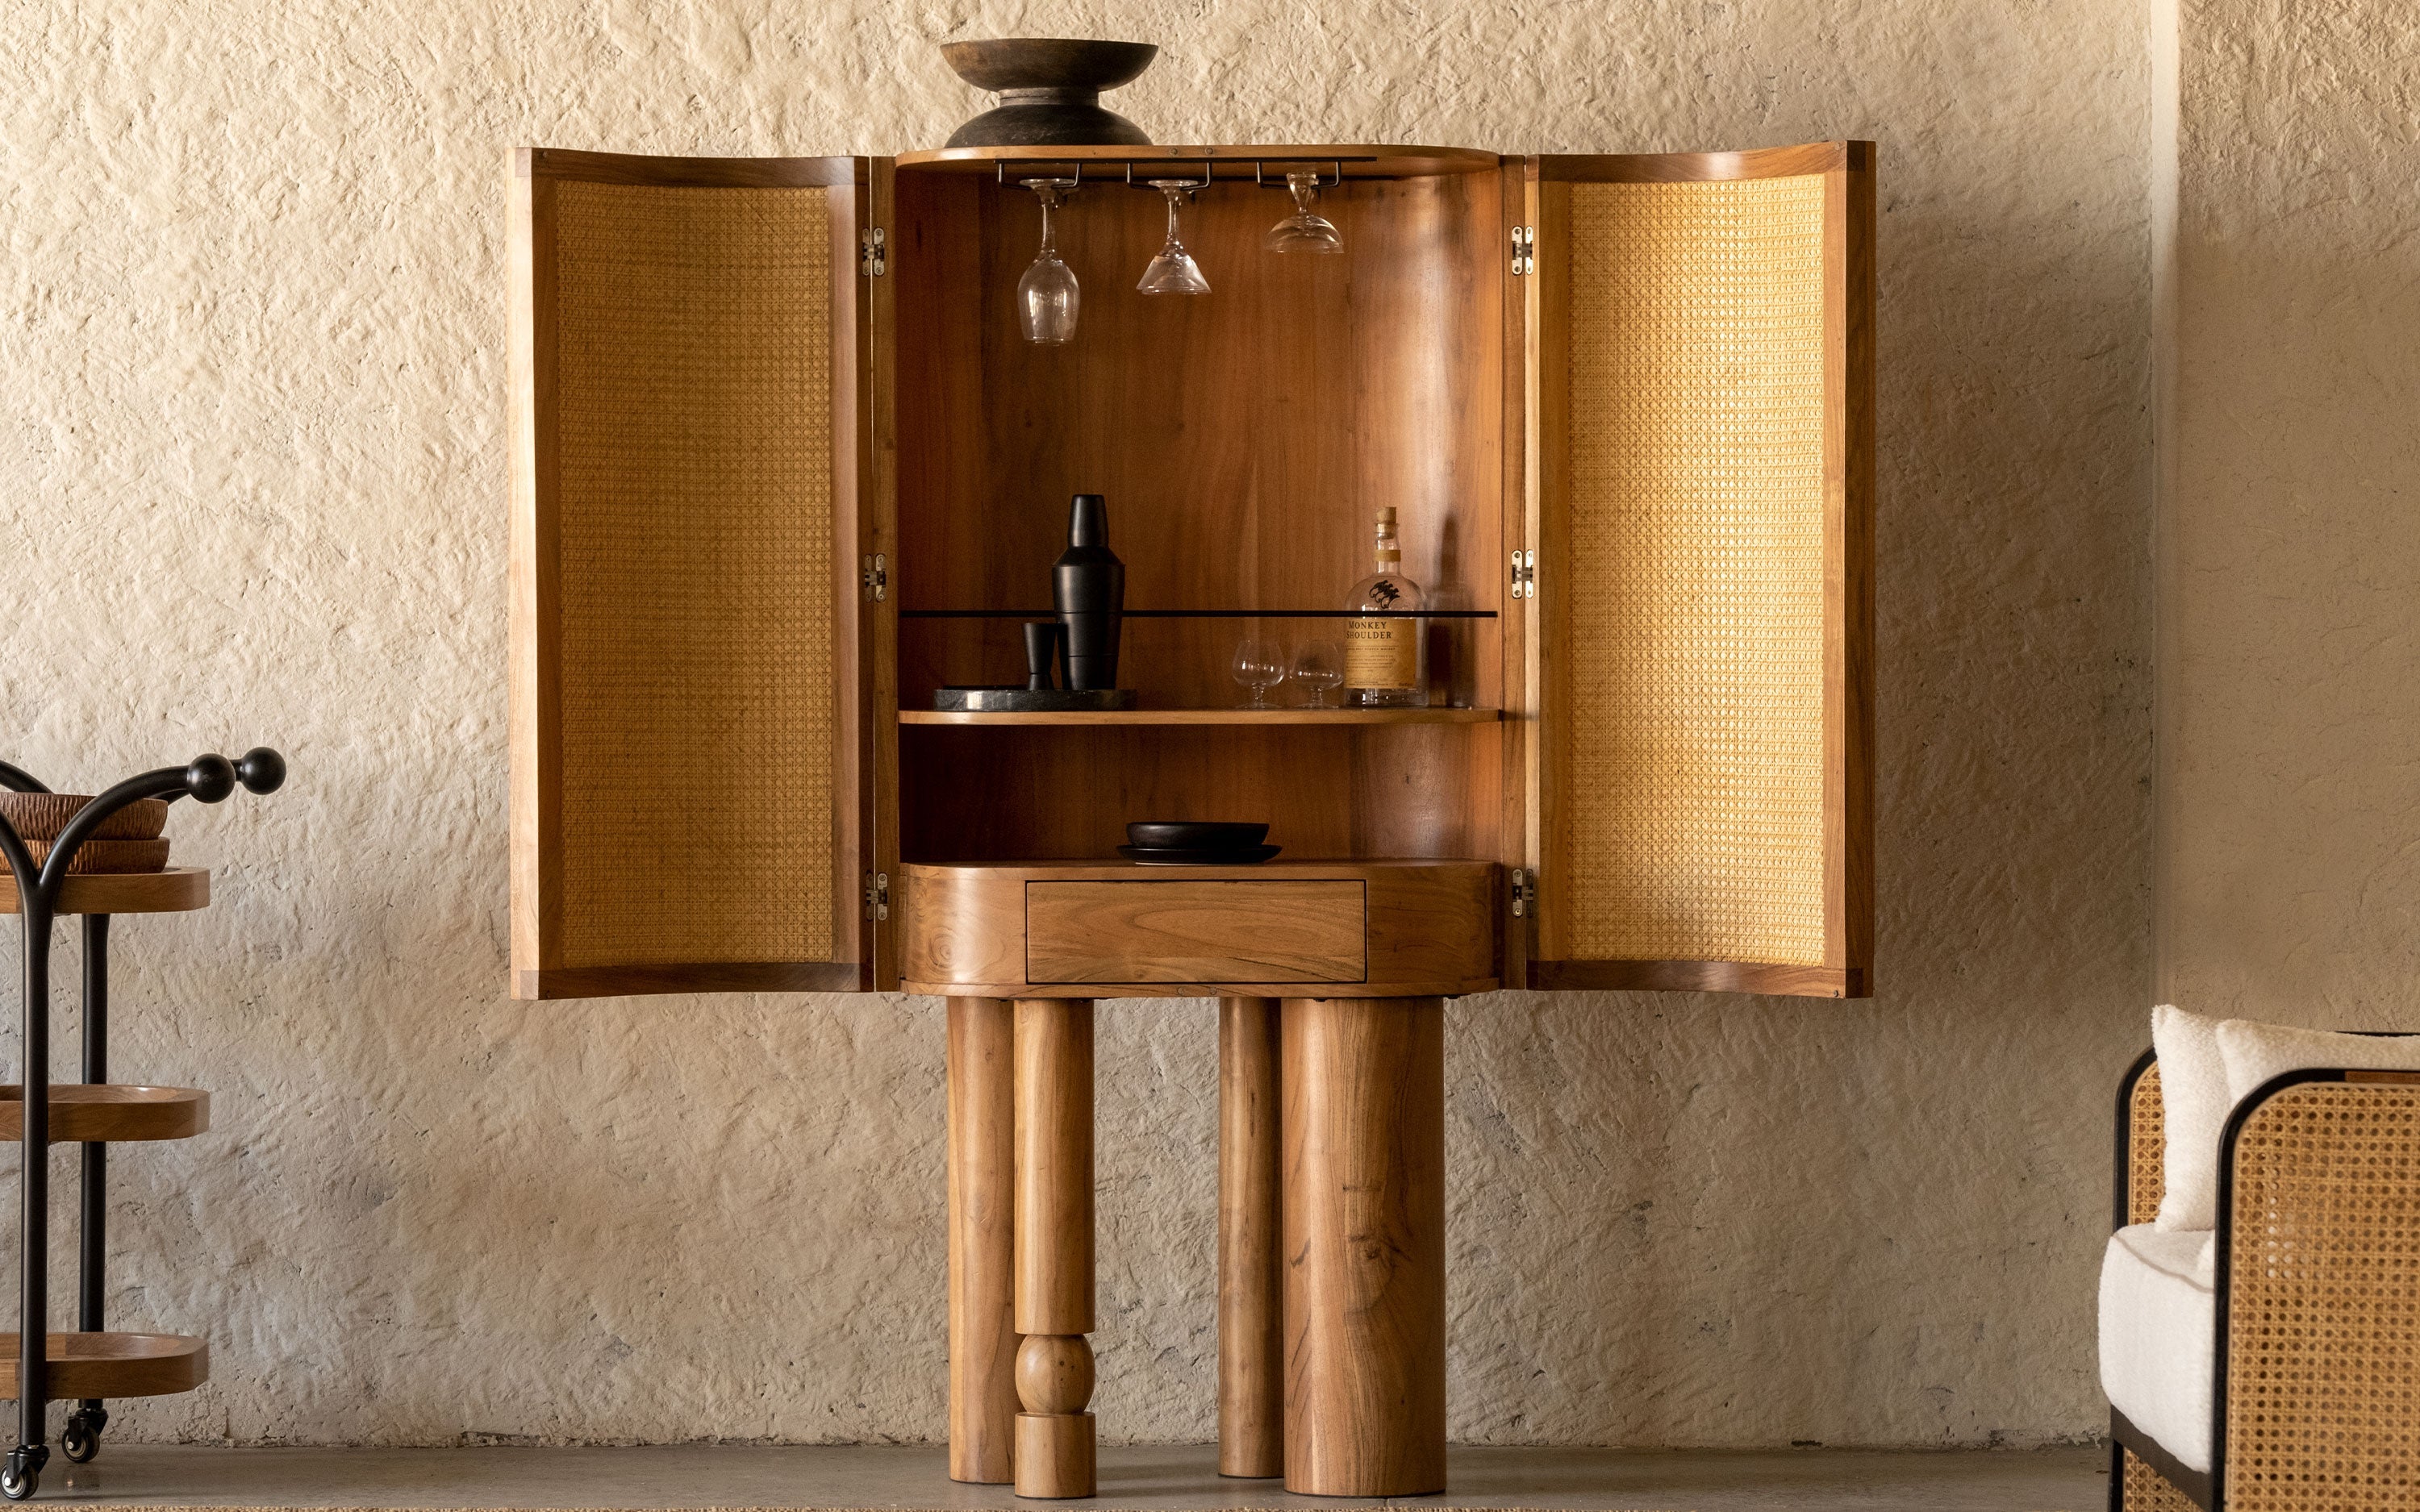 An elegant wooden bar cabinet with storage compartments and a natural finish, perfect as a home bar centerpiece.